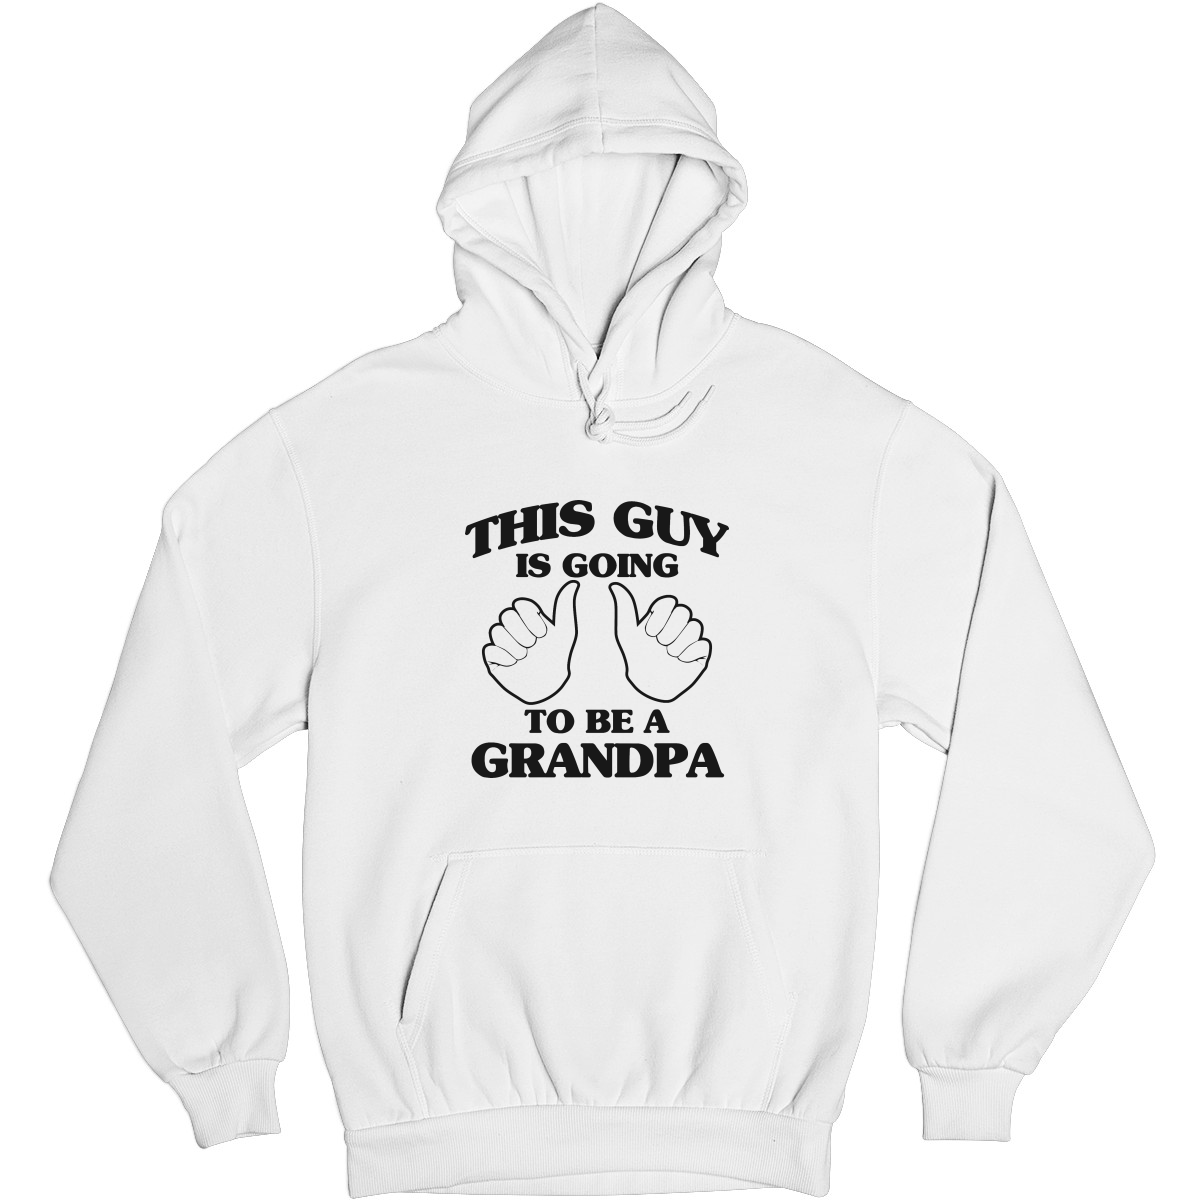 This Guy Is Going To Be A Grandpa Unisex Hoodie | White